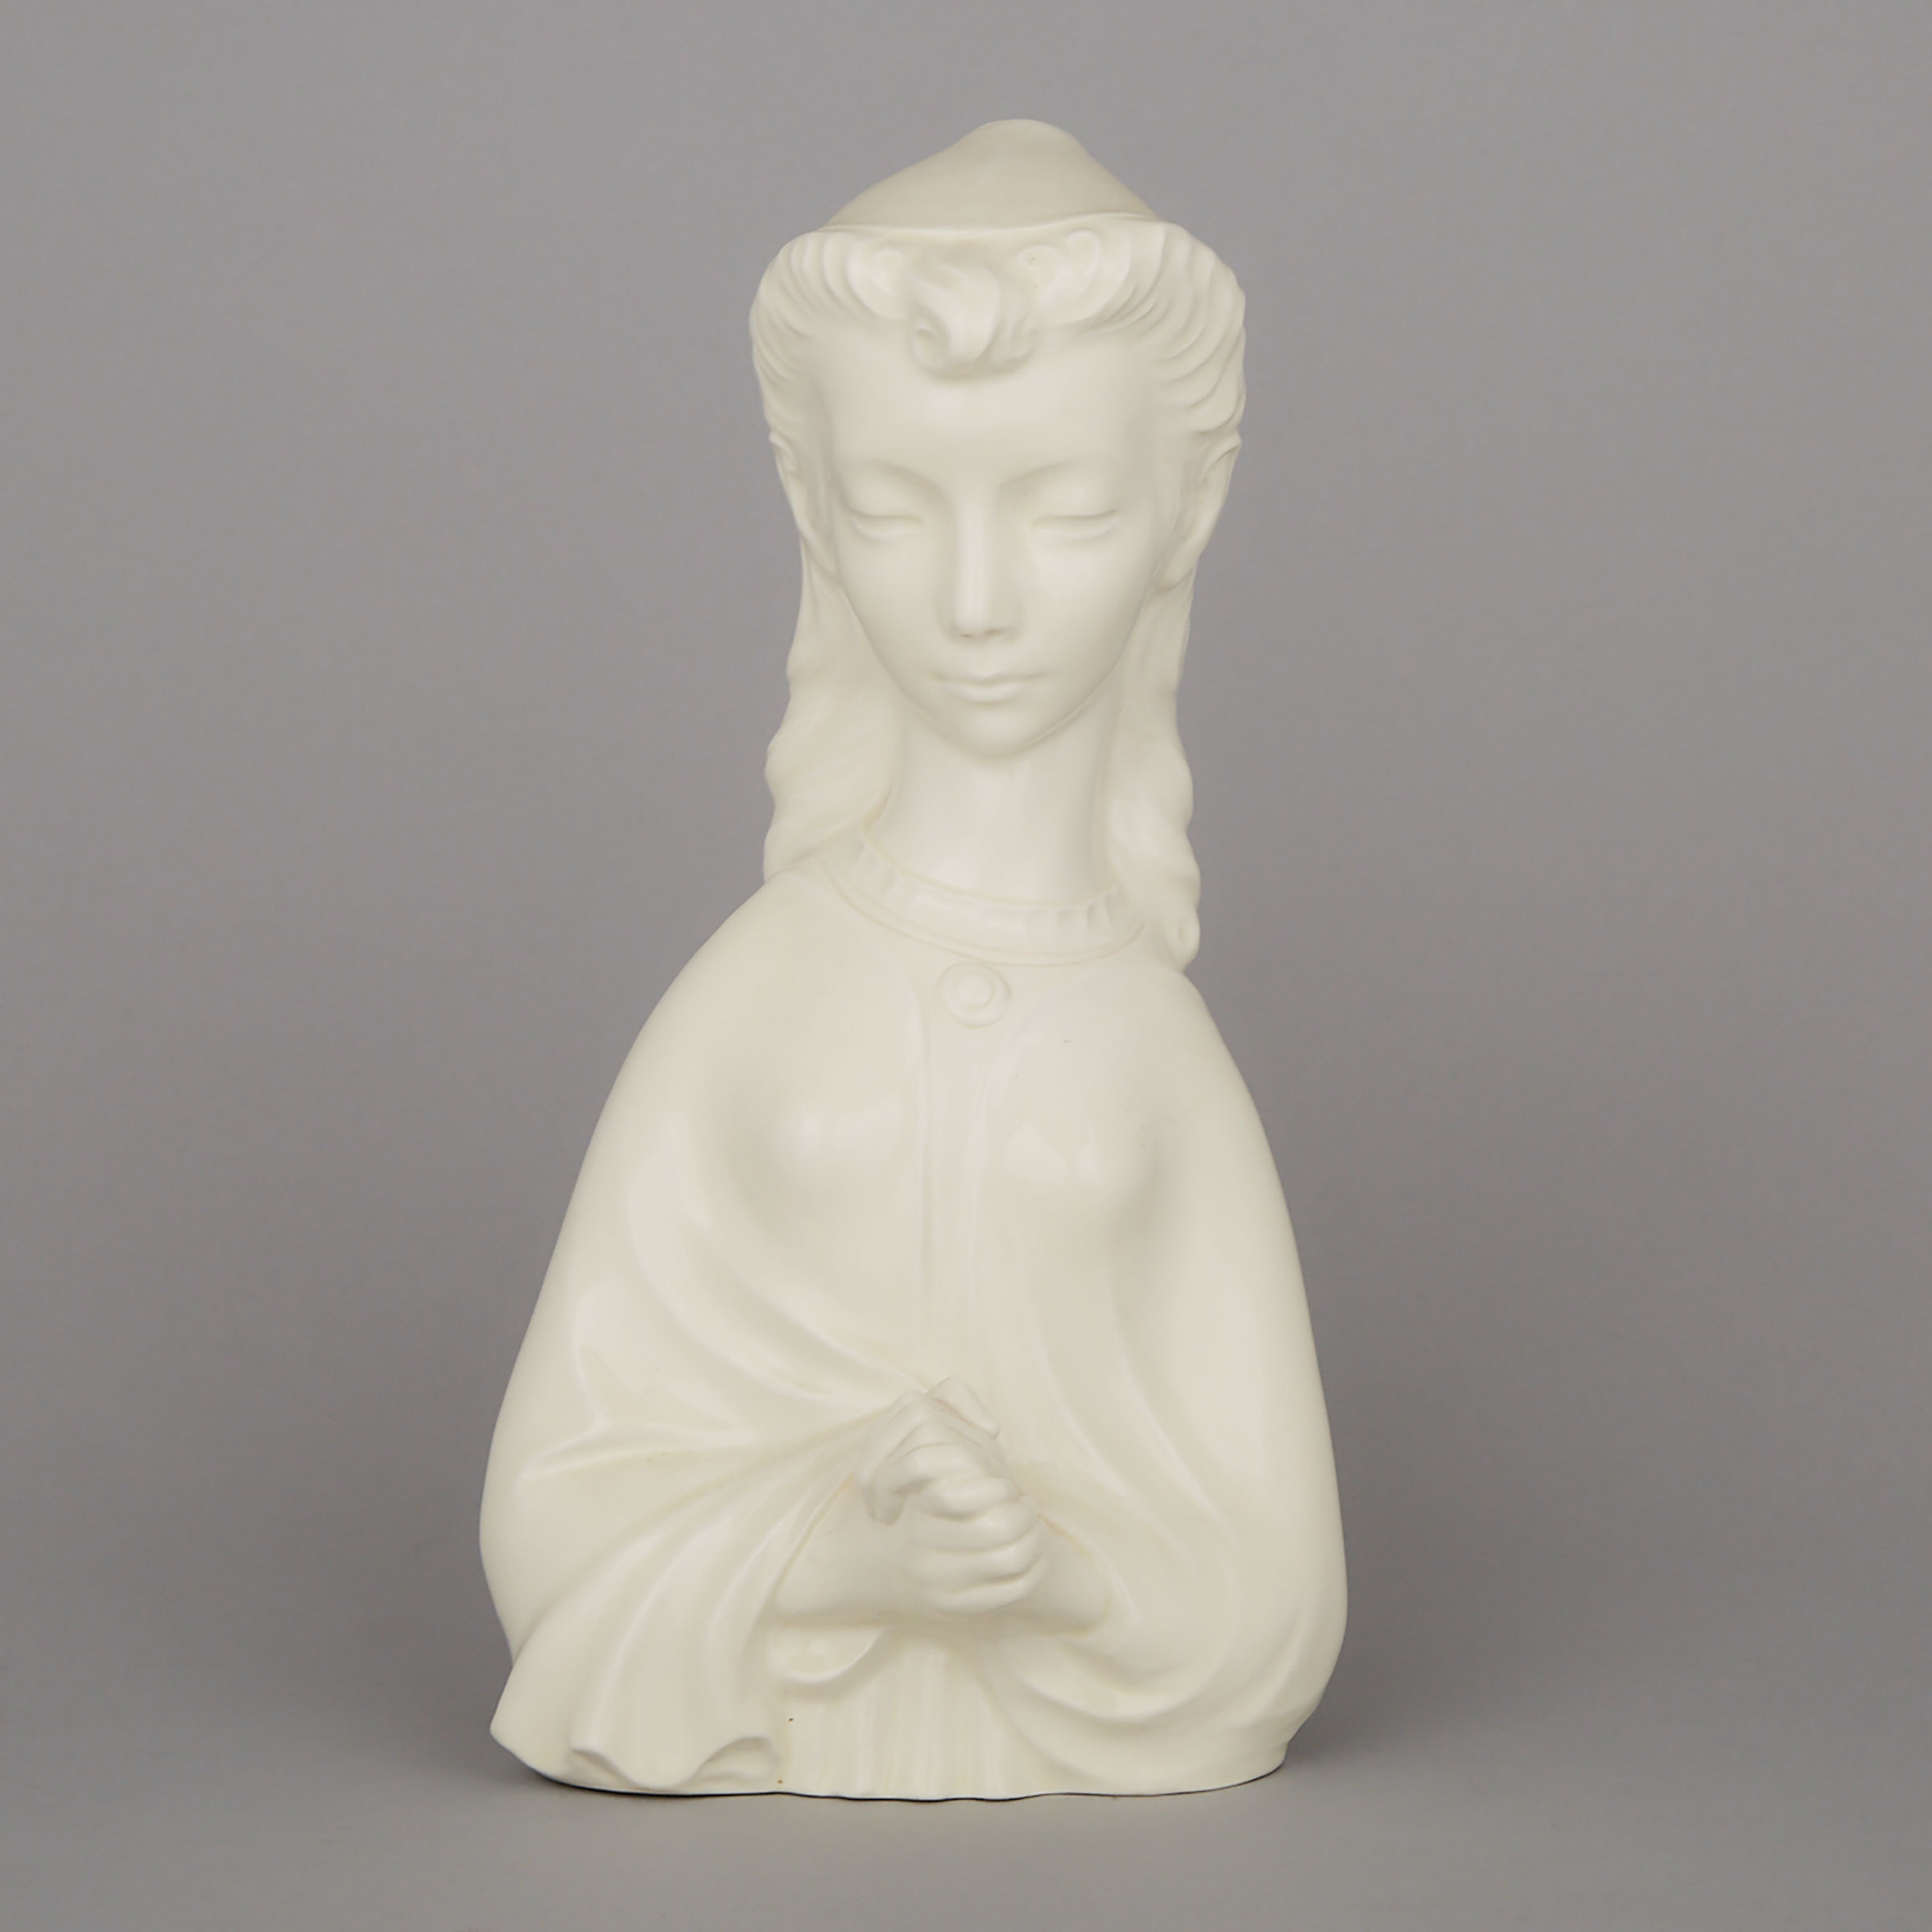 Wedgwood Queen’s Ware Bust of Penelope, Arnold Machin, 1954